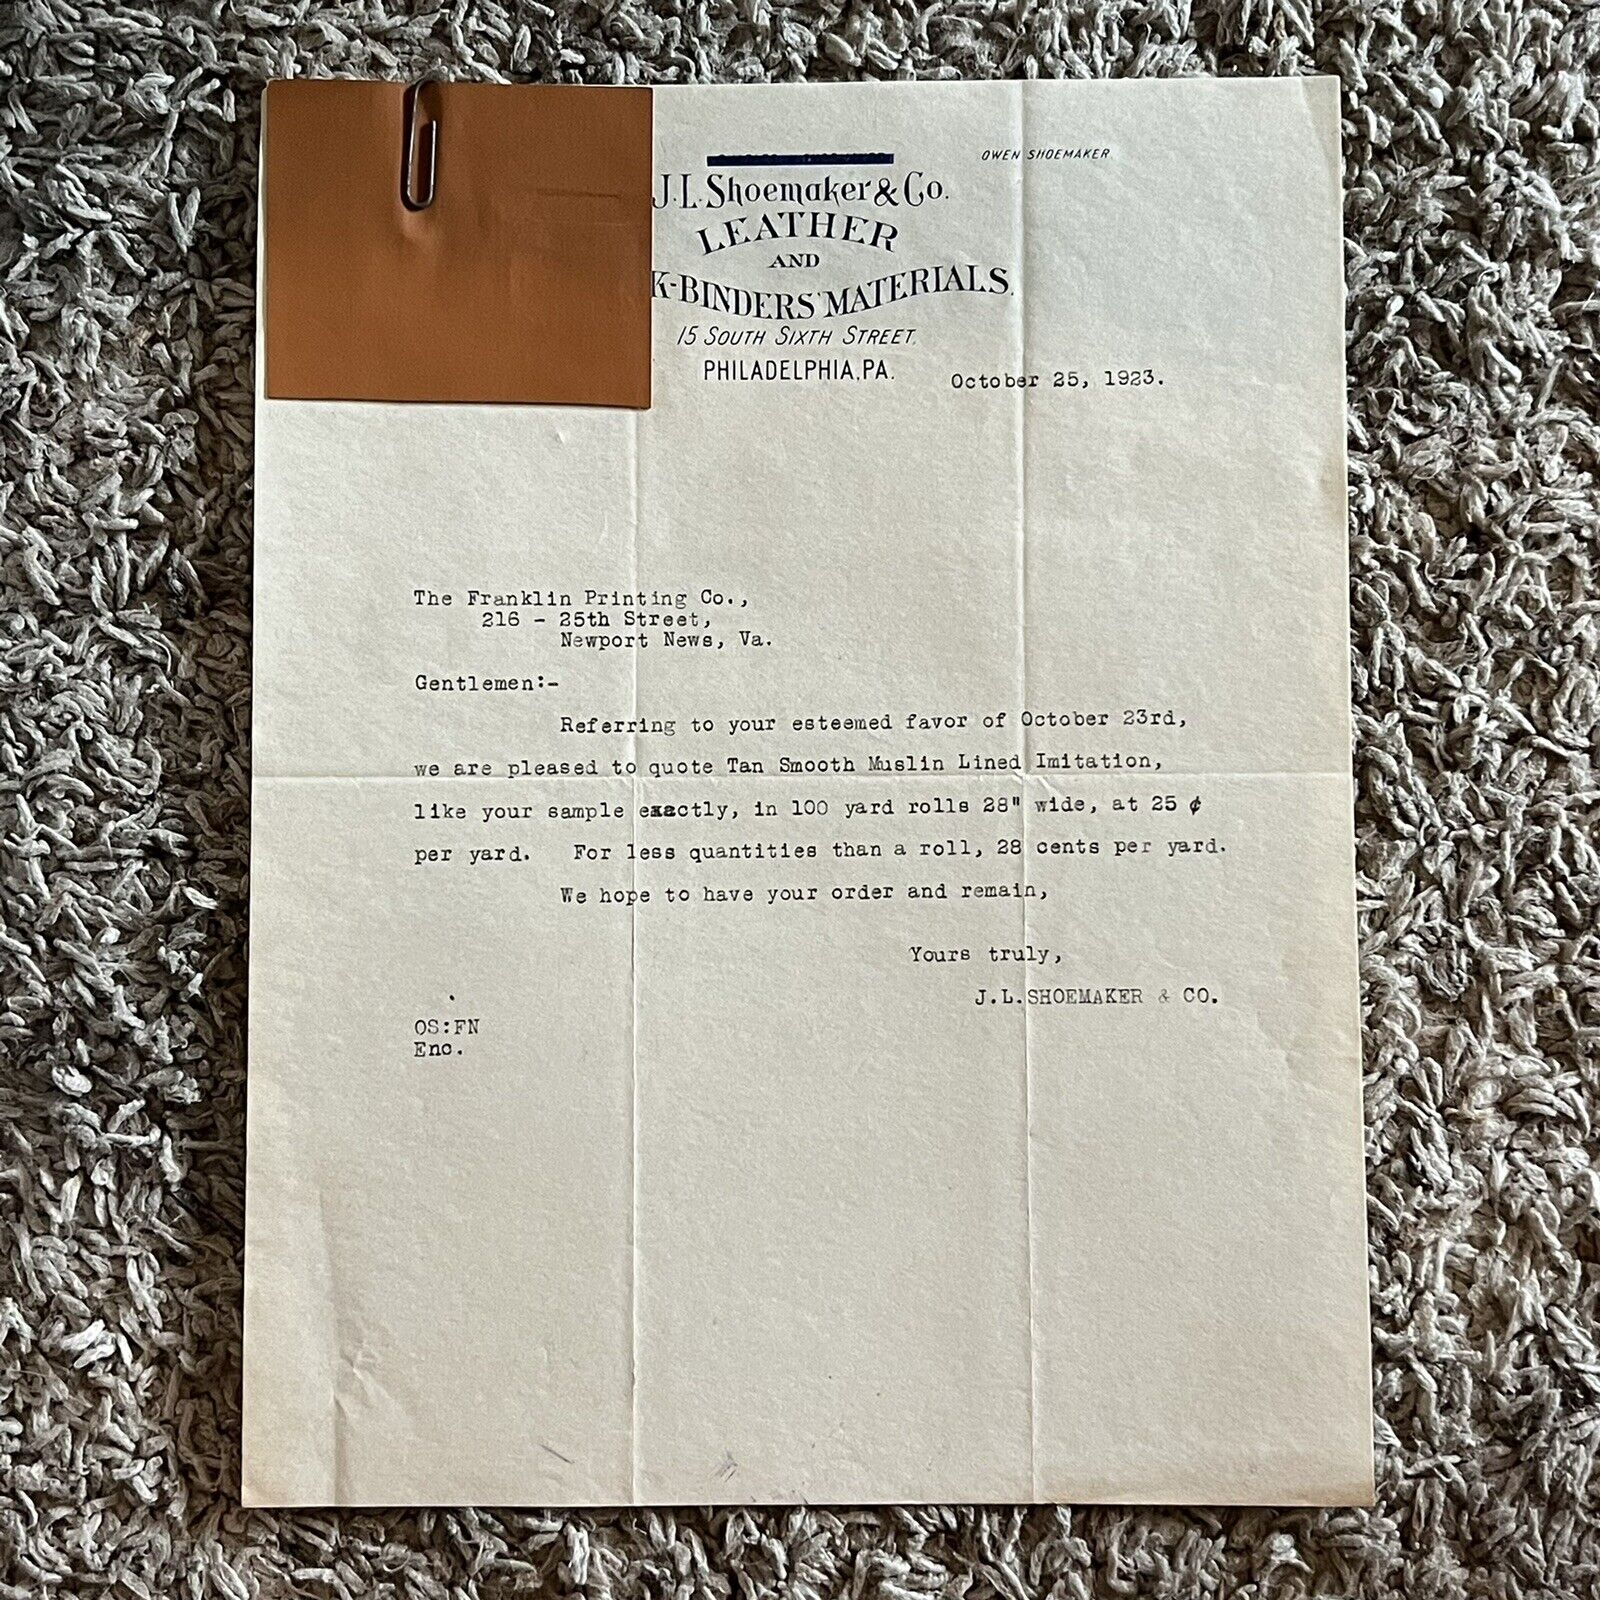 RARE 1923 LETTER WITH LEATHER SAMPLE FROM J.L. SHOEMAKER COMPANY PHILADELPHIA